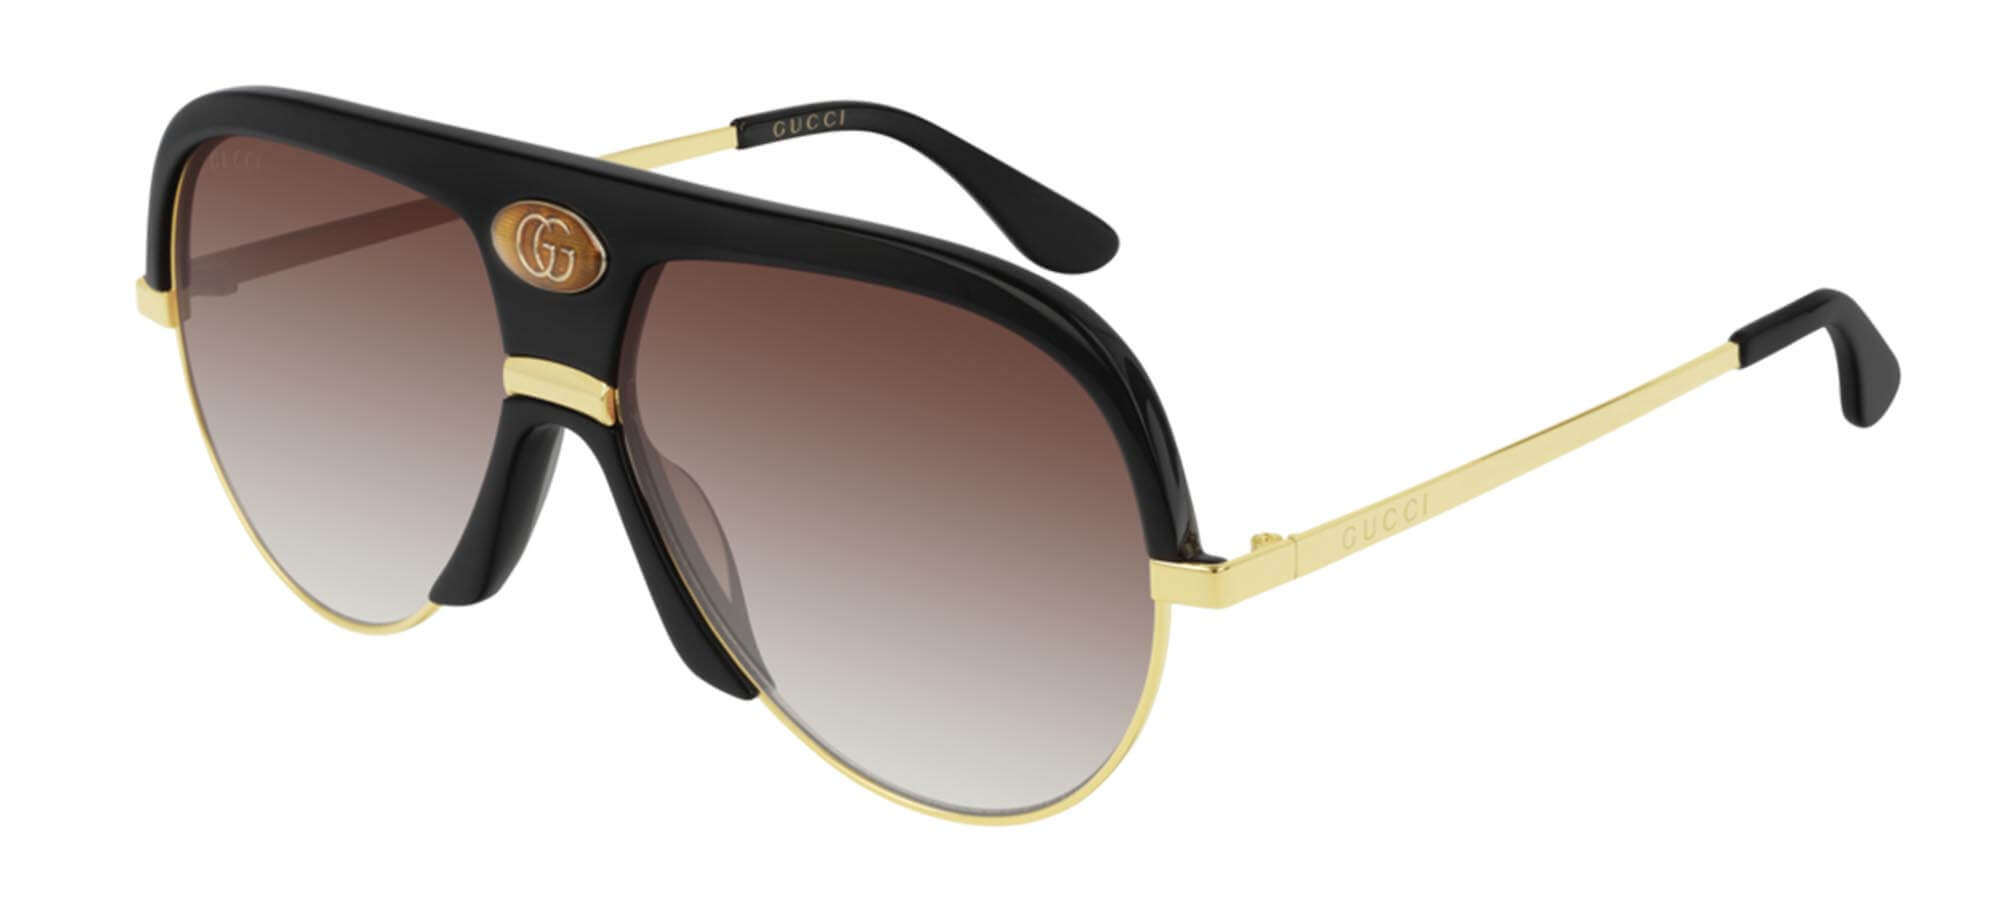 GucciGG0477SBlack/brown Shaded (001 FW)